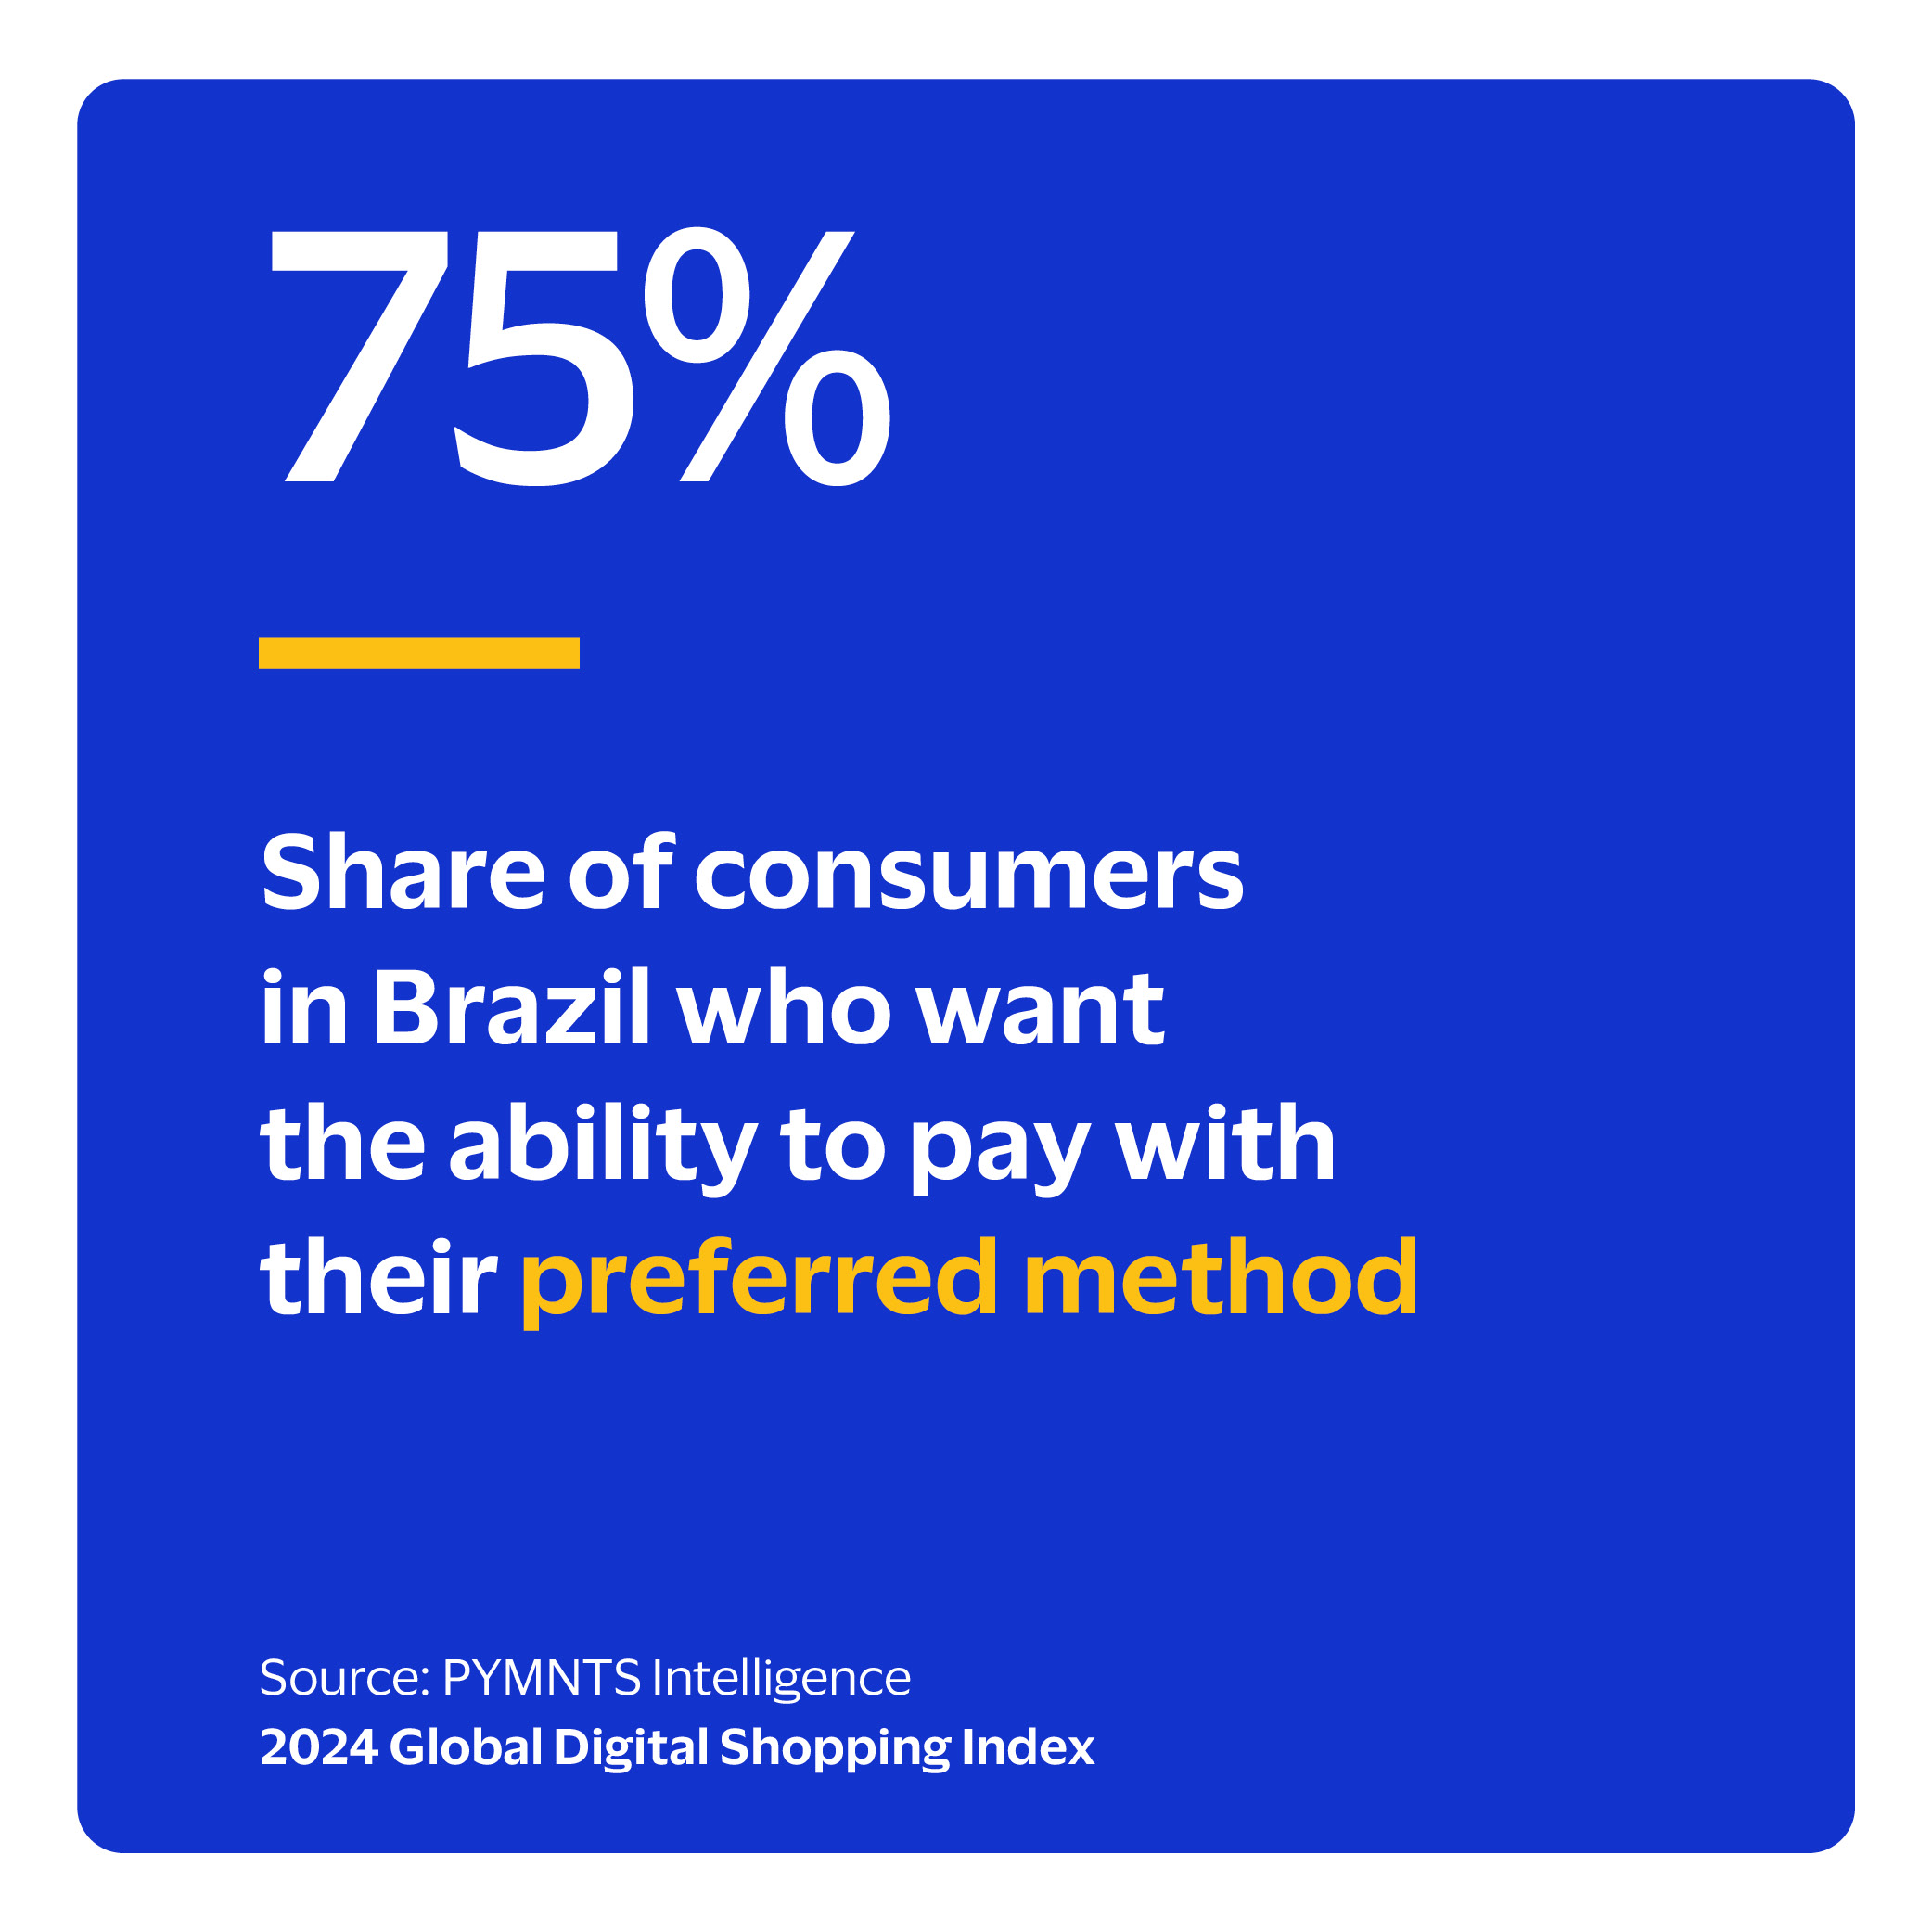  Share of consumers in Brazil who want the ability to pay with their preferred method